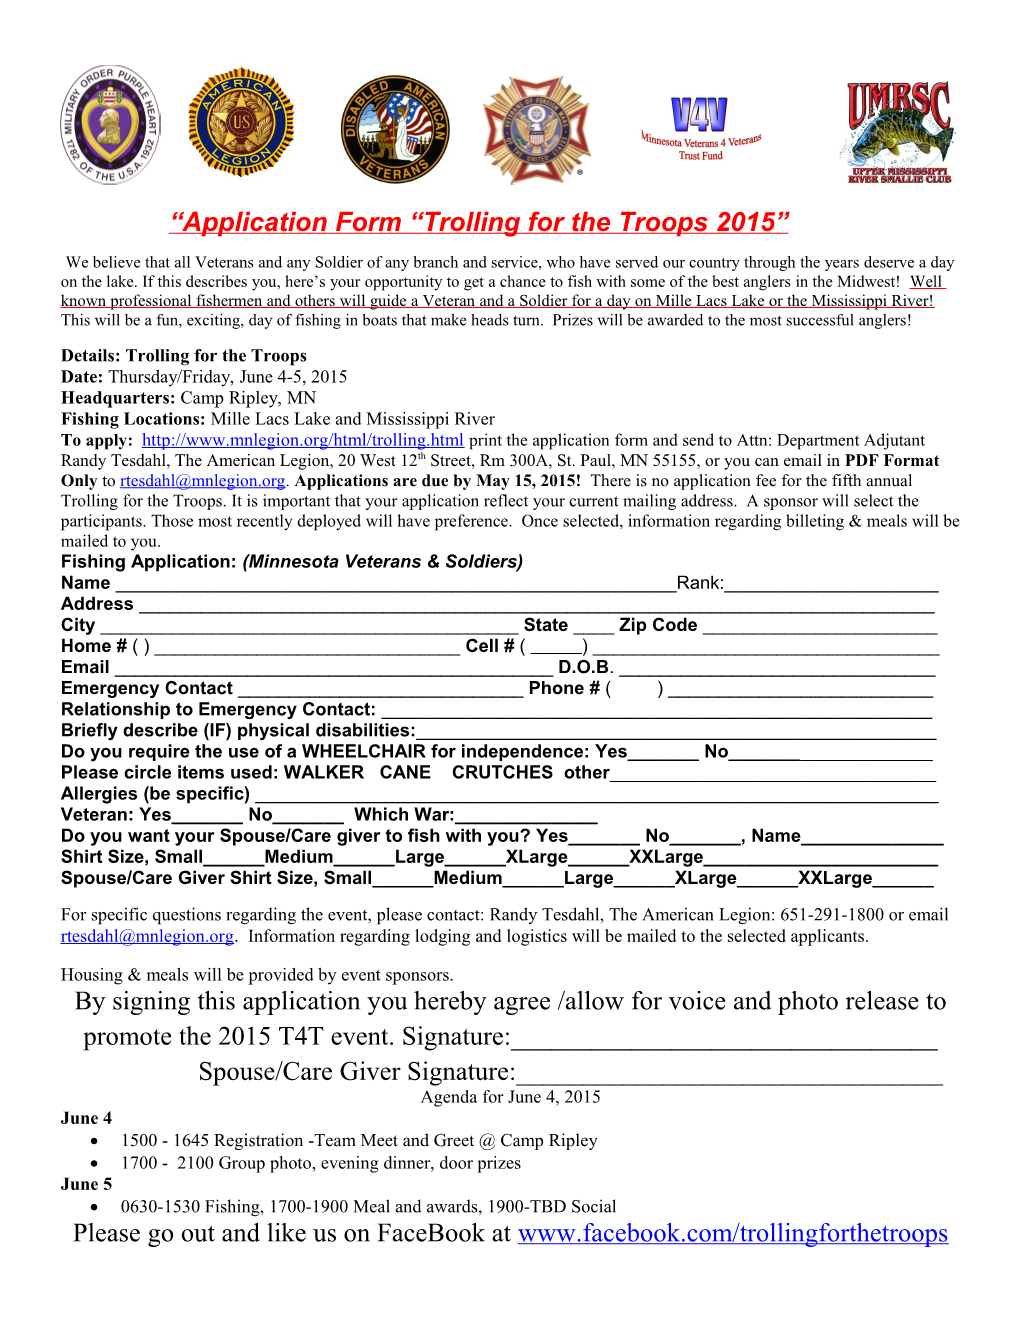 Application Form Trolling for the Troops 2015